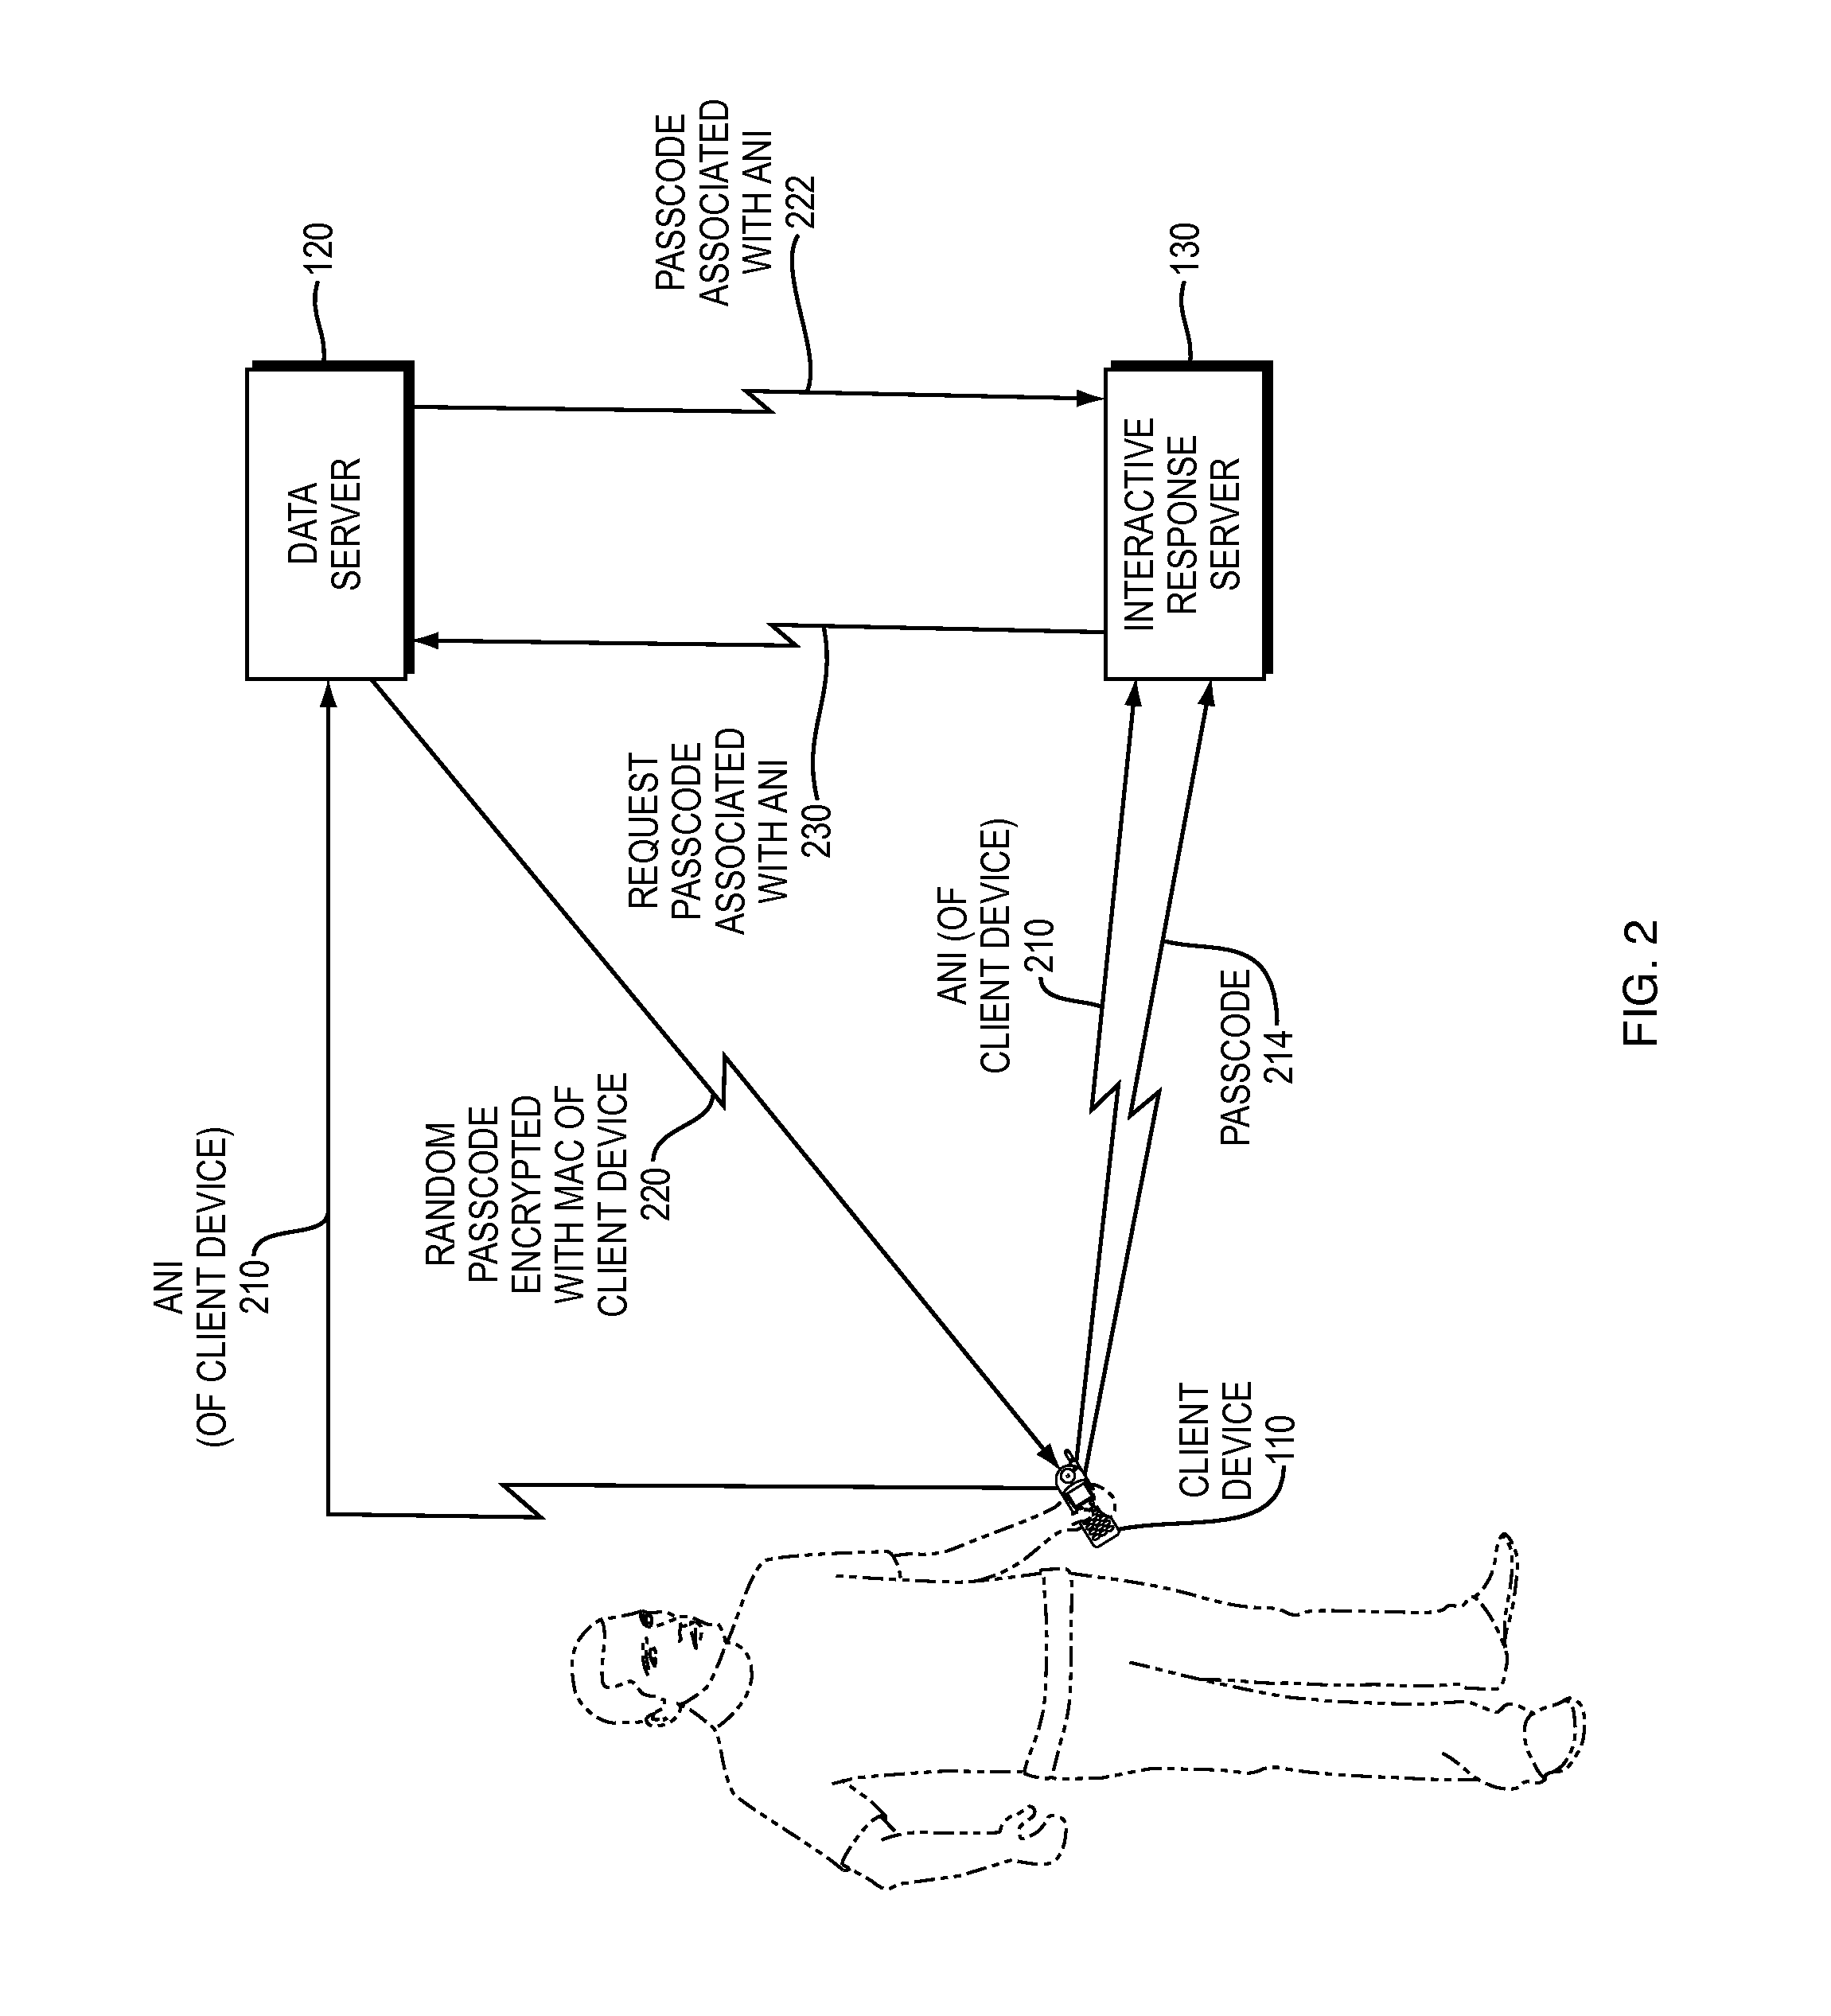 Method and Apparatus for Providing Enhanced Communications